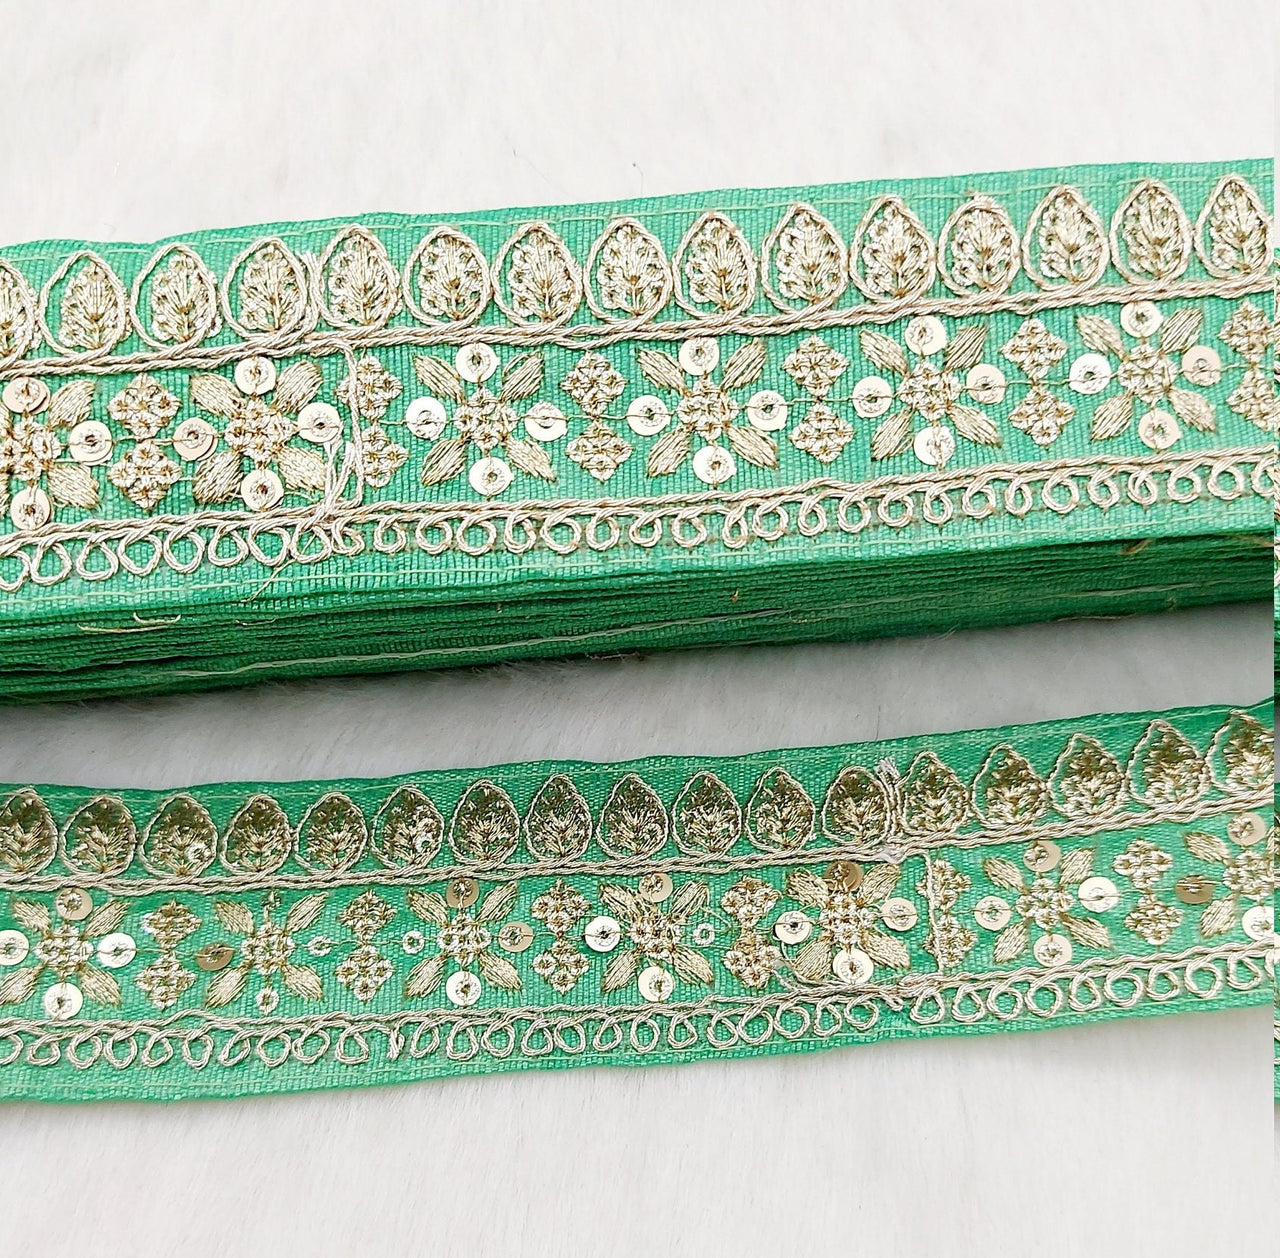 Green Art Silk Fabric Trim With Gold Floral Embroidery, Floral Sequins Sari Border, Trim By 9 Yards